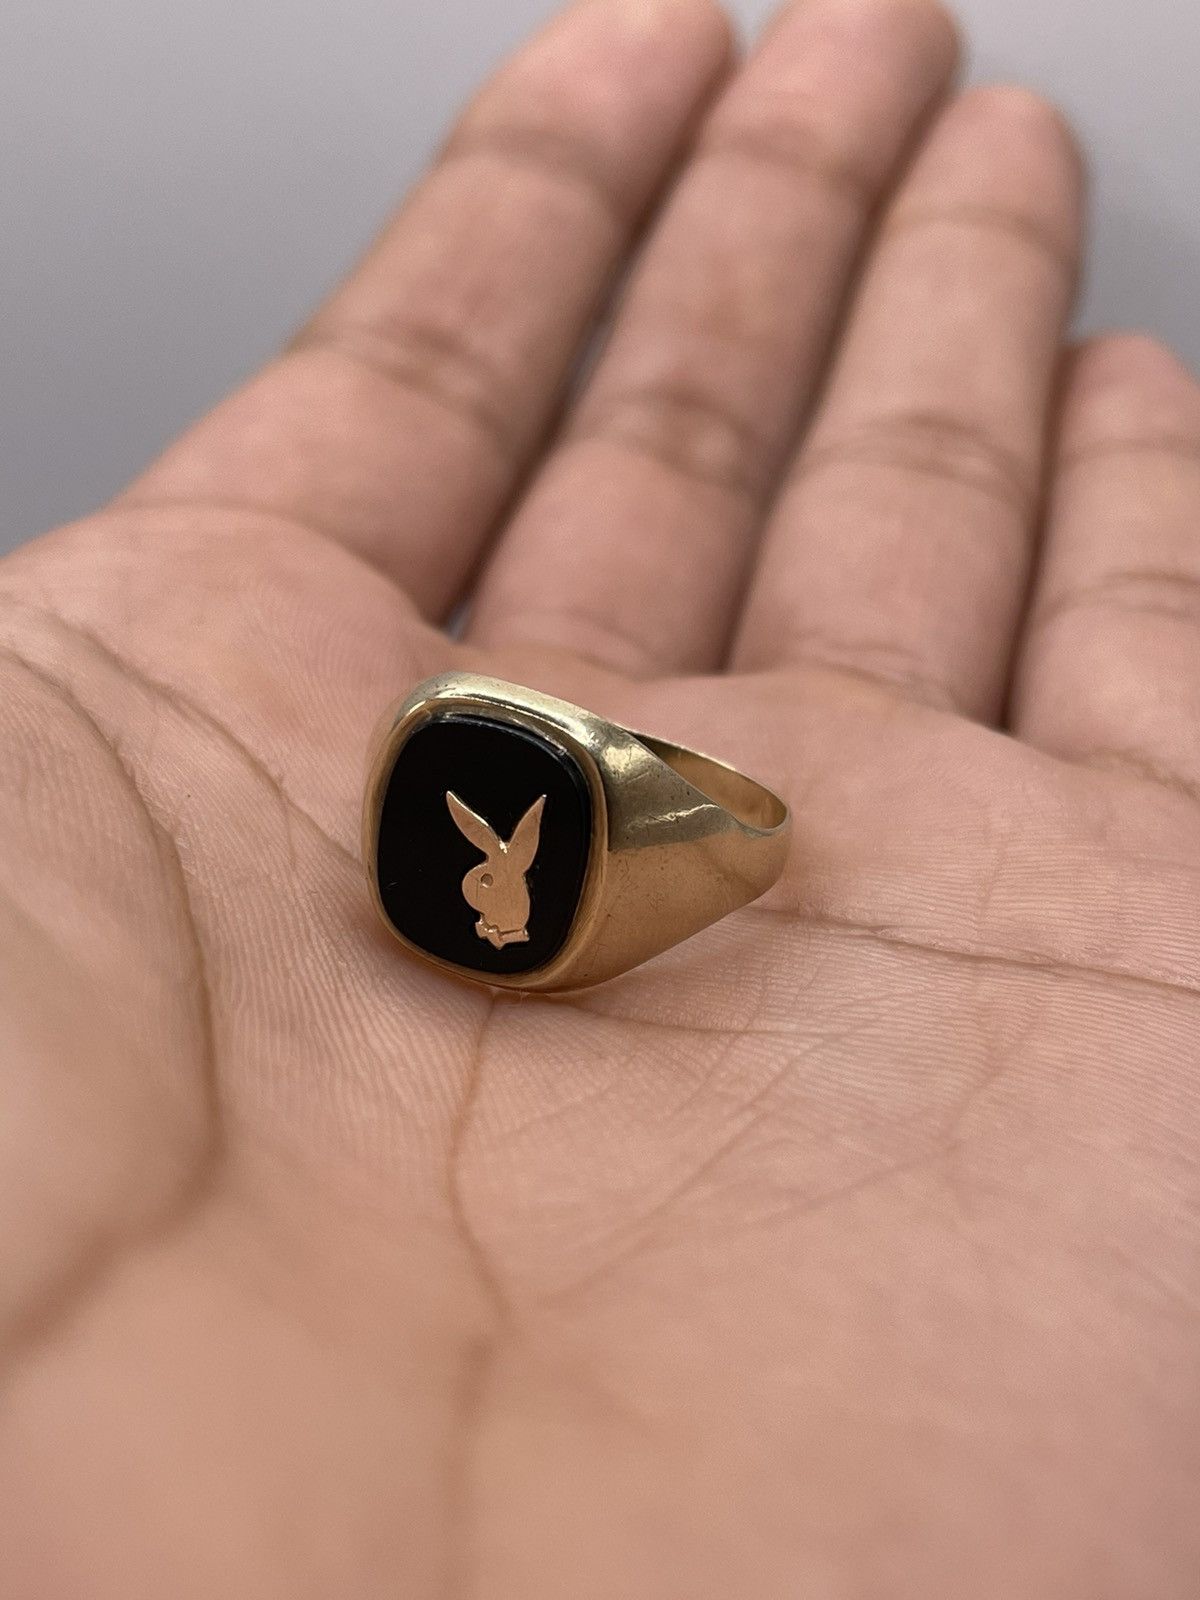 Playboy Supreme Gold Ring | Grailed